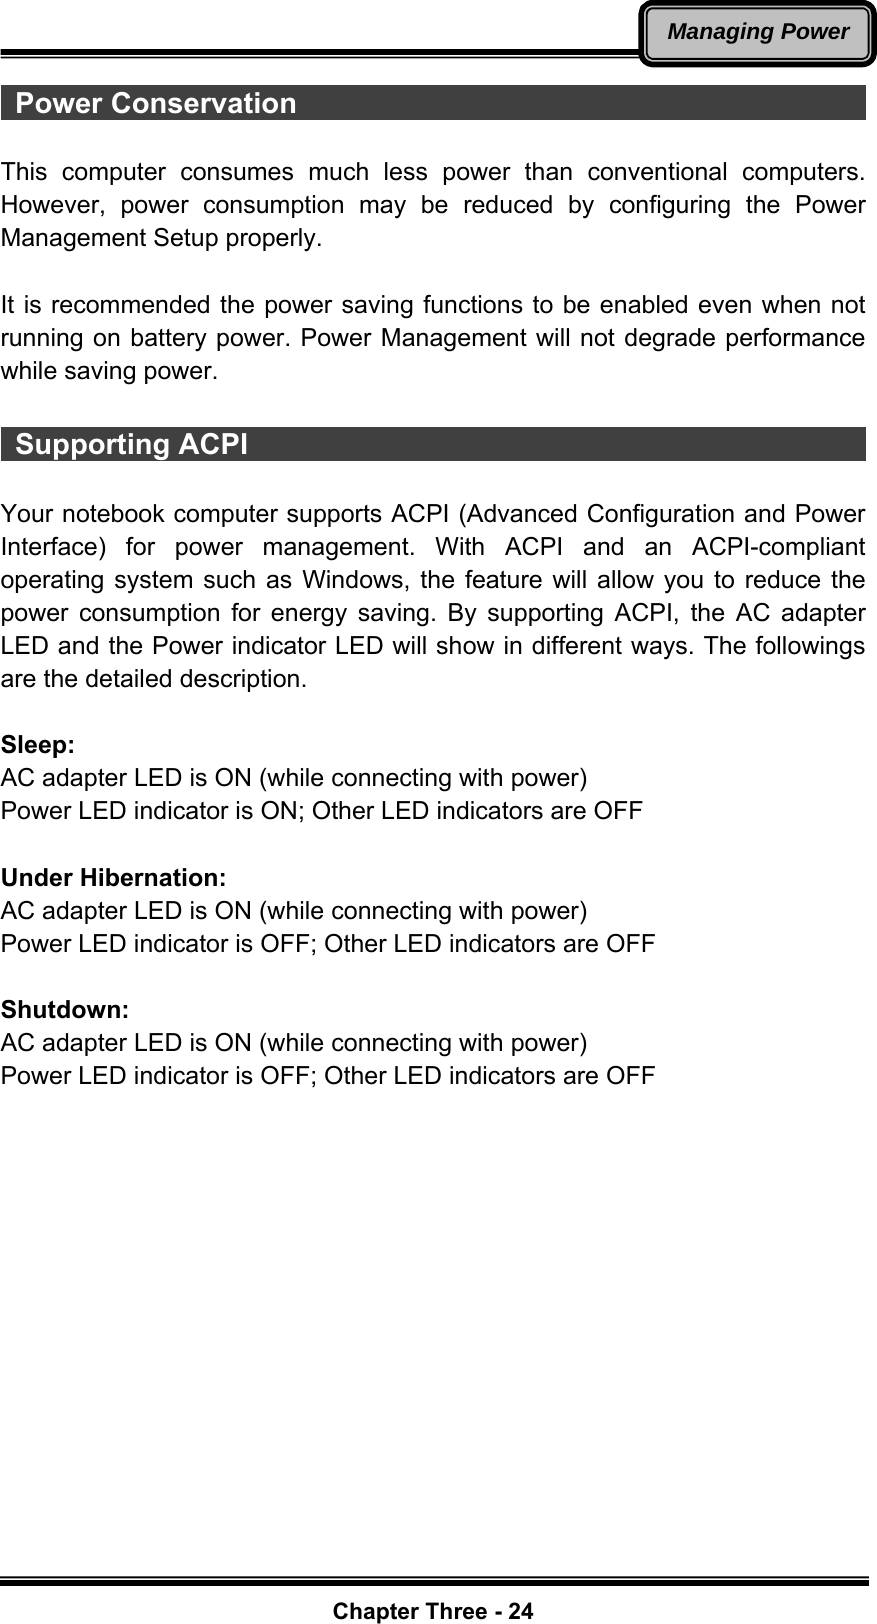   Chapter Three - 24Managing Power Power Conservation                                                     This computer consumes much less power than conventional computers. However, power consumption may be reduced by configuring the Power Management Setup properly.  It is recommended the power saving functions to be enabled even when not running on battery power. Power Management will not degrade performance while saving power.   Supporting ACPI                                              Your notebook computer supports ACPI (Advanced Configuration and Power Interface) for power management. With ACPI and an ACPI-compliant operating system such as Windows, the feature will allow you to reduce the power consumption for energy saving. By supporting ACPI, the AC adapter LED and the Power indicator LED will show in different ways. The followings are the detailed description.  Sleep: AC adapter LED is ON (while connecting with power) Power LED indicator is ON; Other LED indicators are OFF  Under Hibernation: AC adapter LED is ON (while connecting with power) Power LED indicator is OFF; Other LED indicators are OFF  Shutdown:  AC adapter LED is ON (while connecting with power) Power LED indicator is OFF; Other LED indicators are OFF    